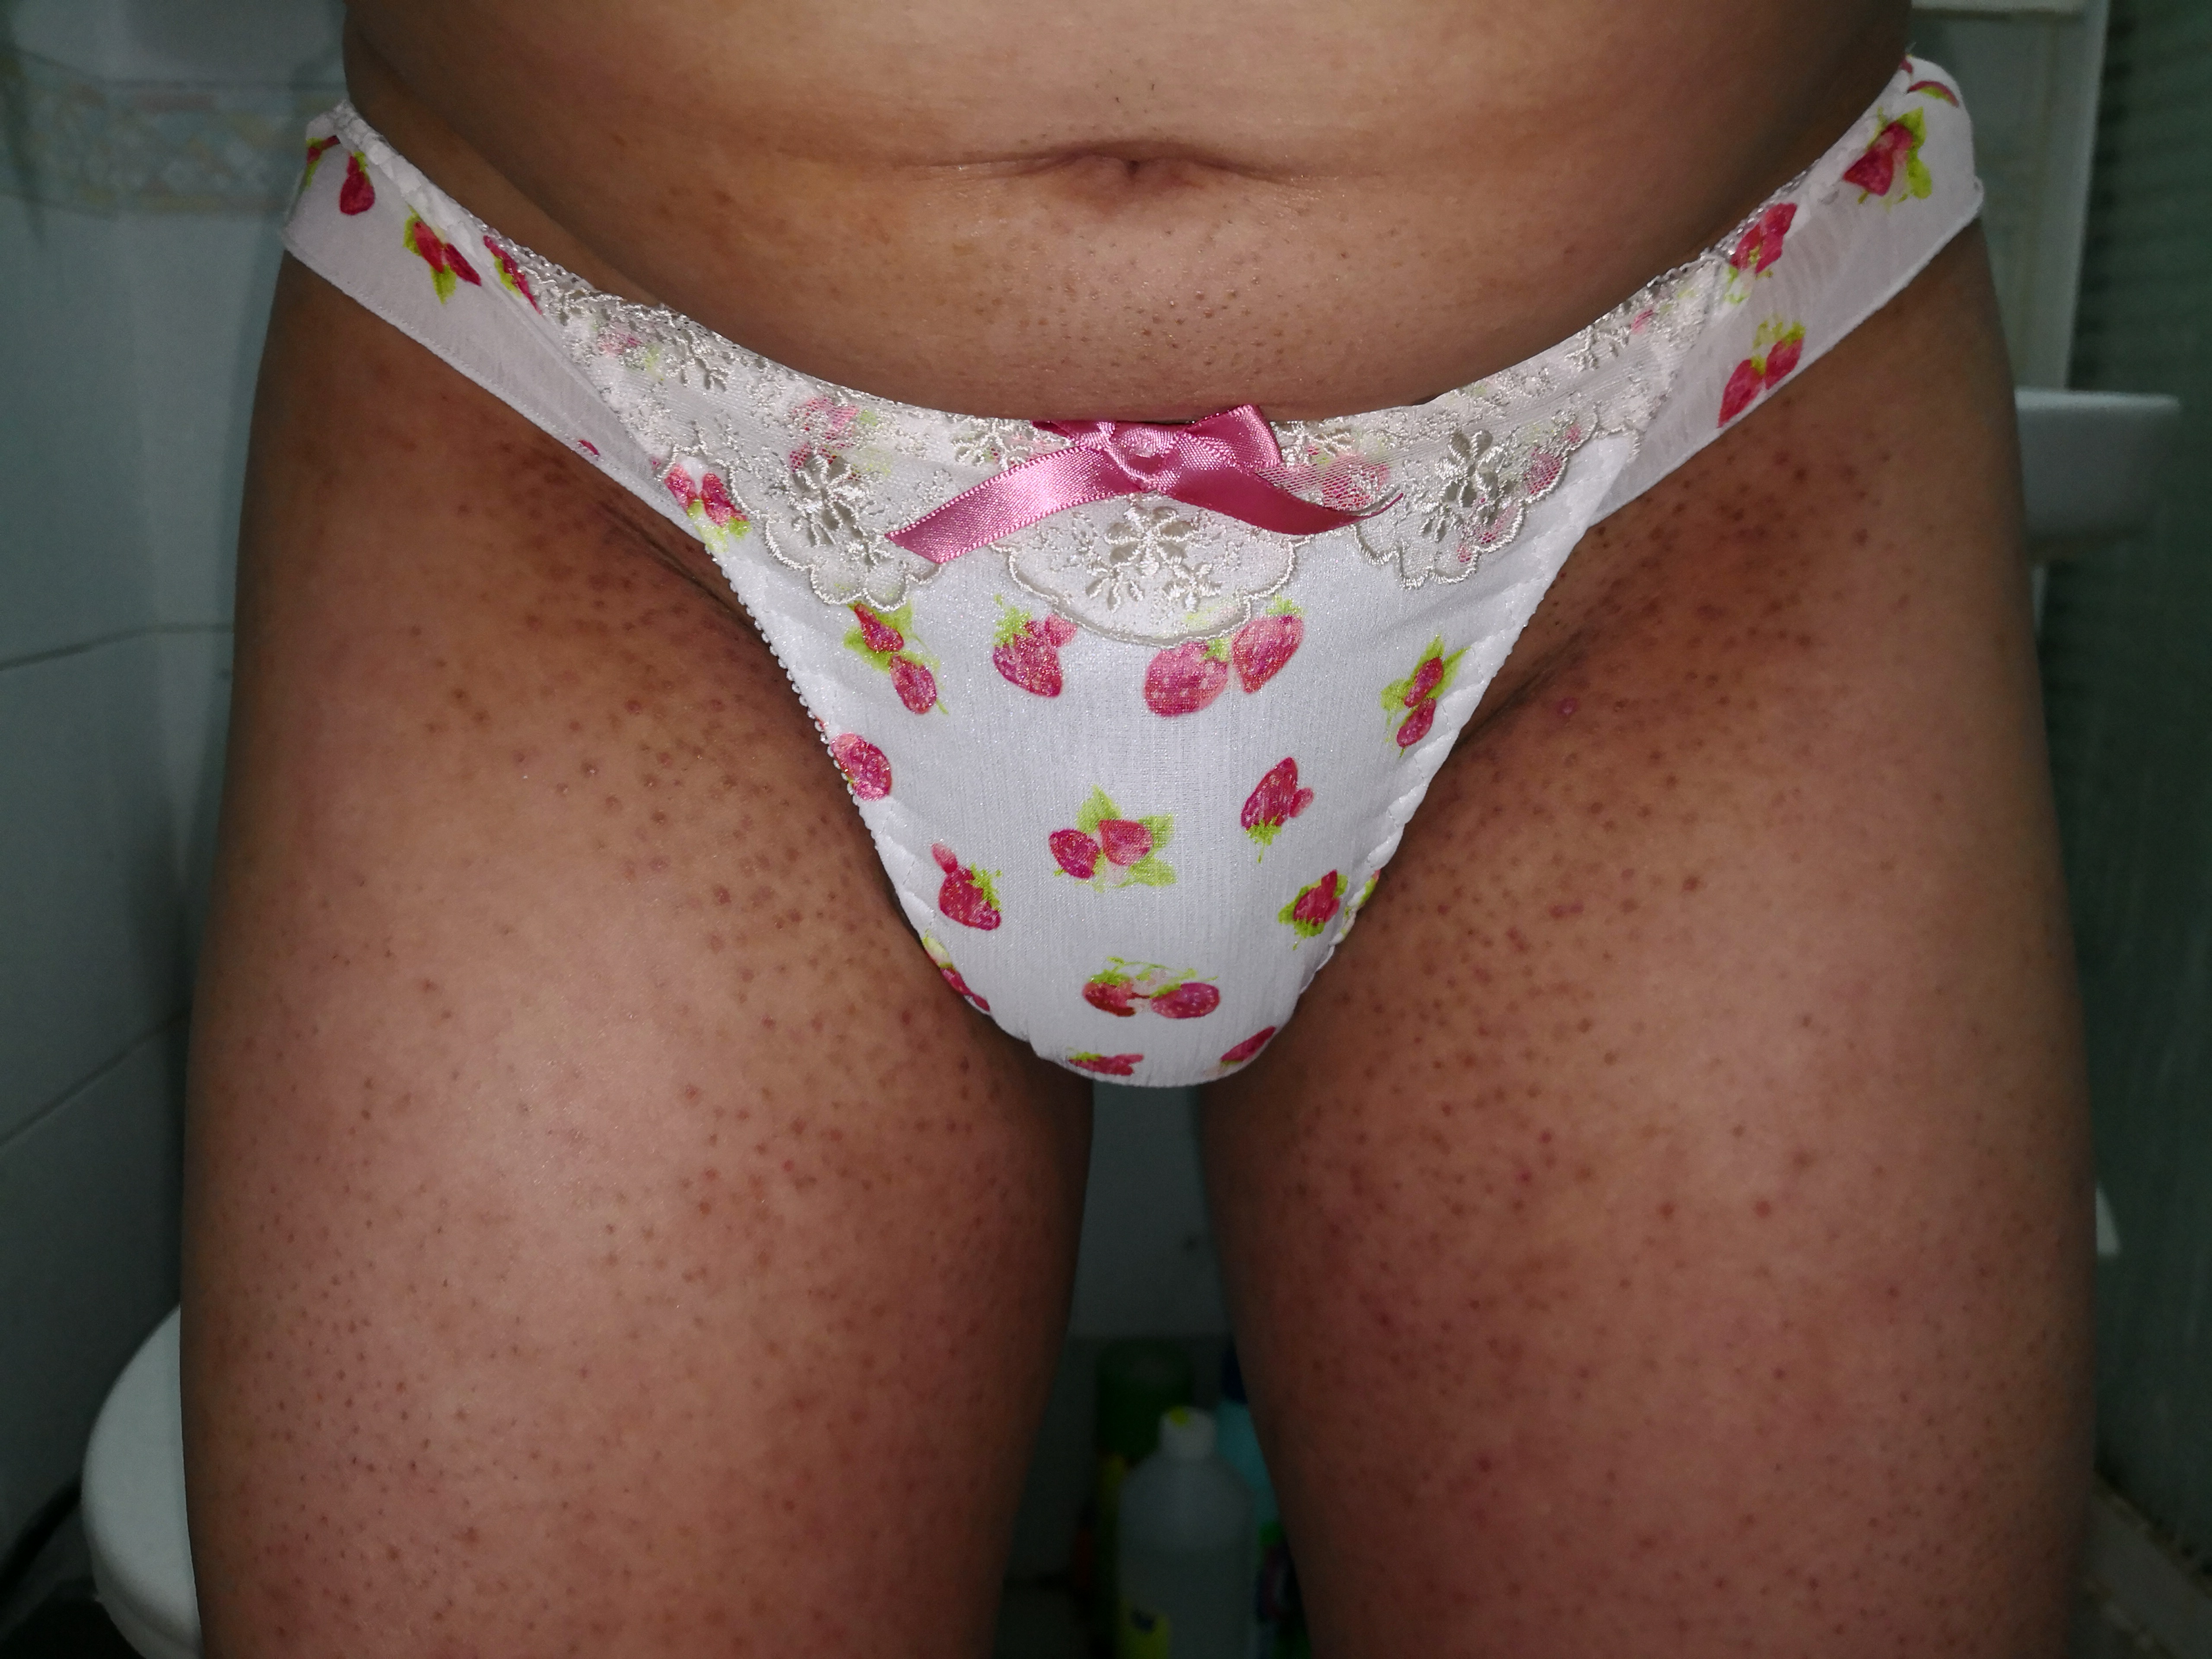 Let put on this lovely Strawberry pattern white panty!